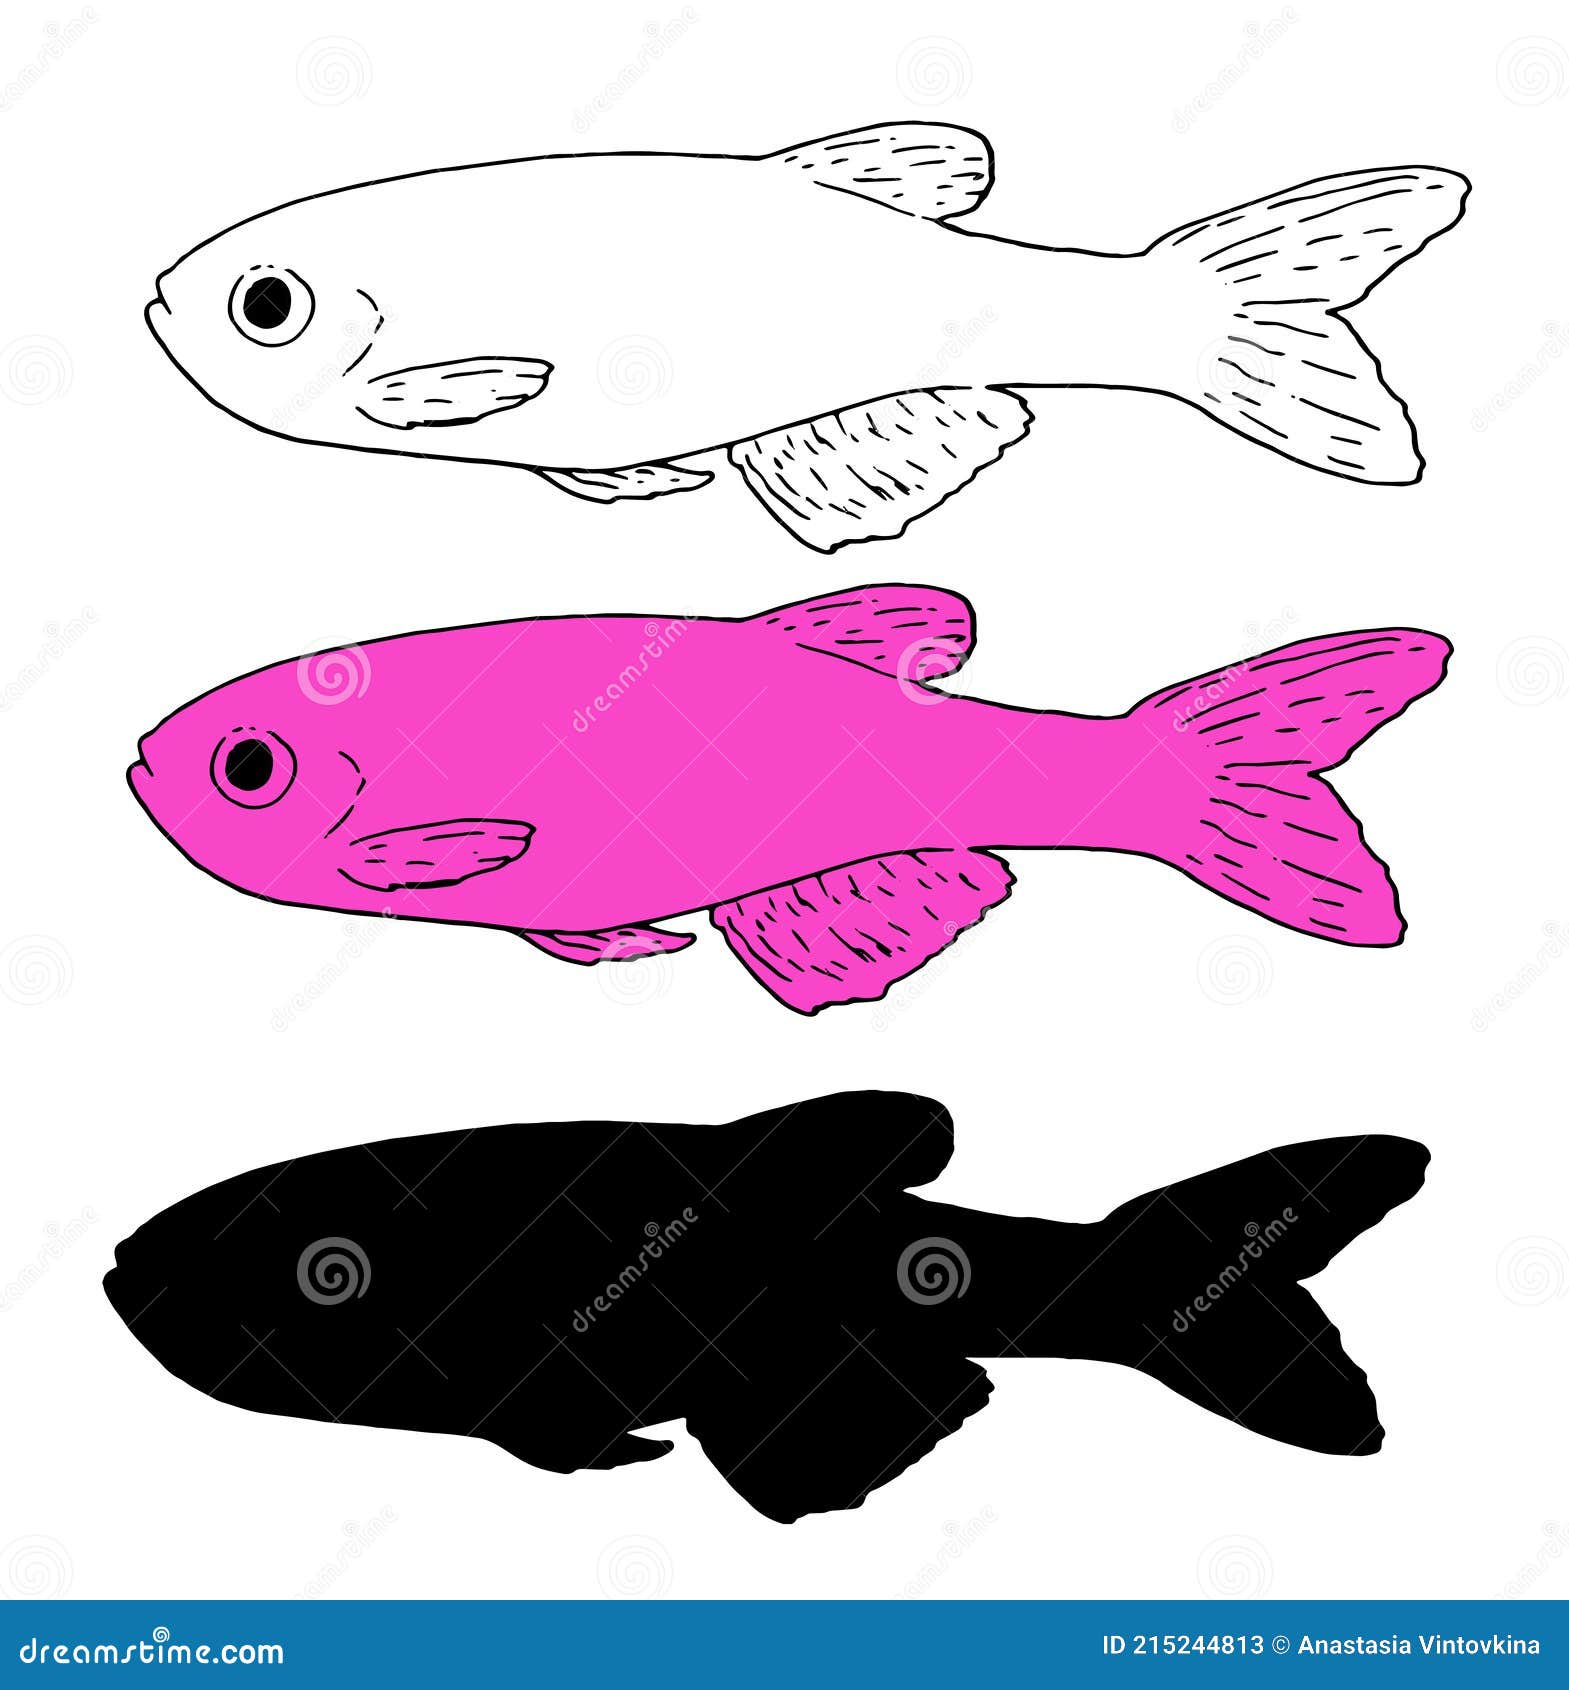 Vector Isolated Sketch Set, Black Silhouette and Color Image of Pink  Aquarium Fish Danio Glofish, Great Design for Any Purpose. Stock Vector -  Illustration of pink, market: 215244813